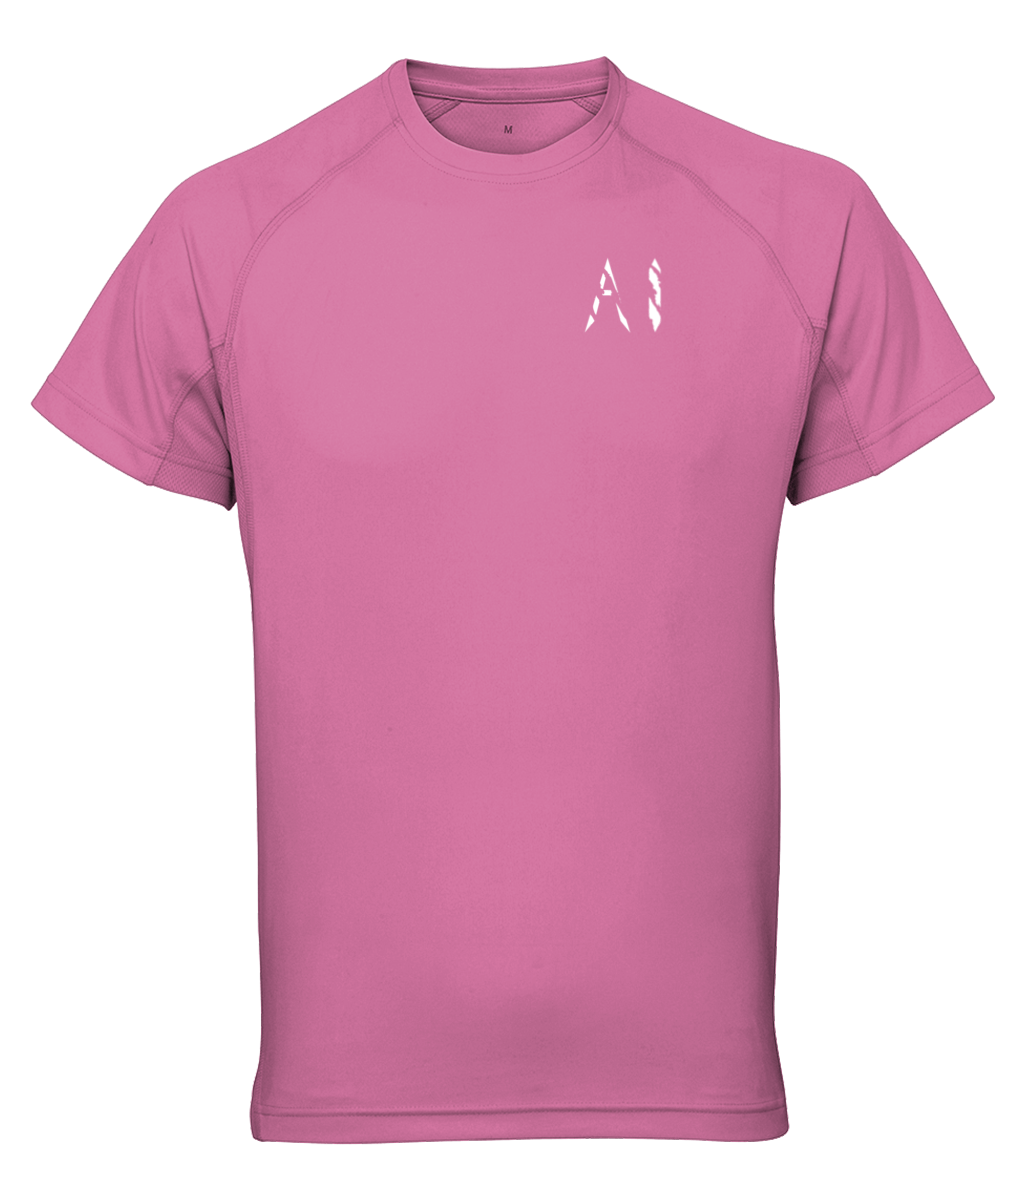 Womens light pink Athletic Performance Top with White AI logo on left breast